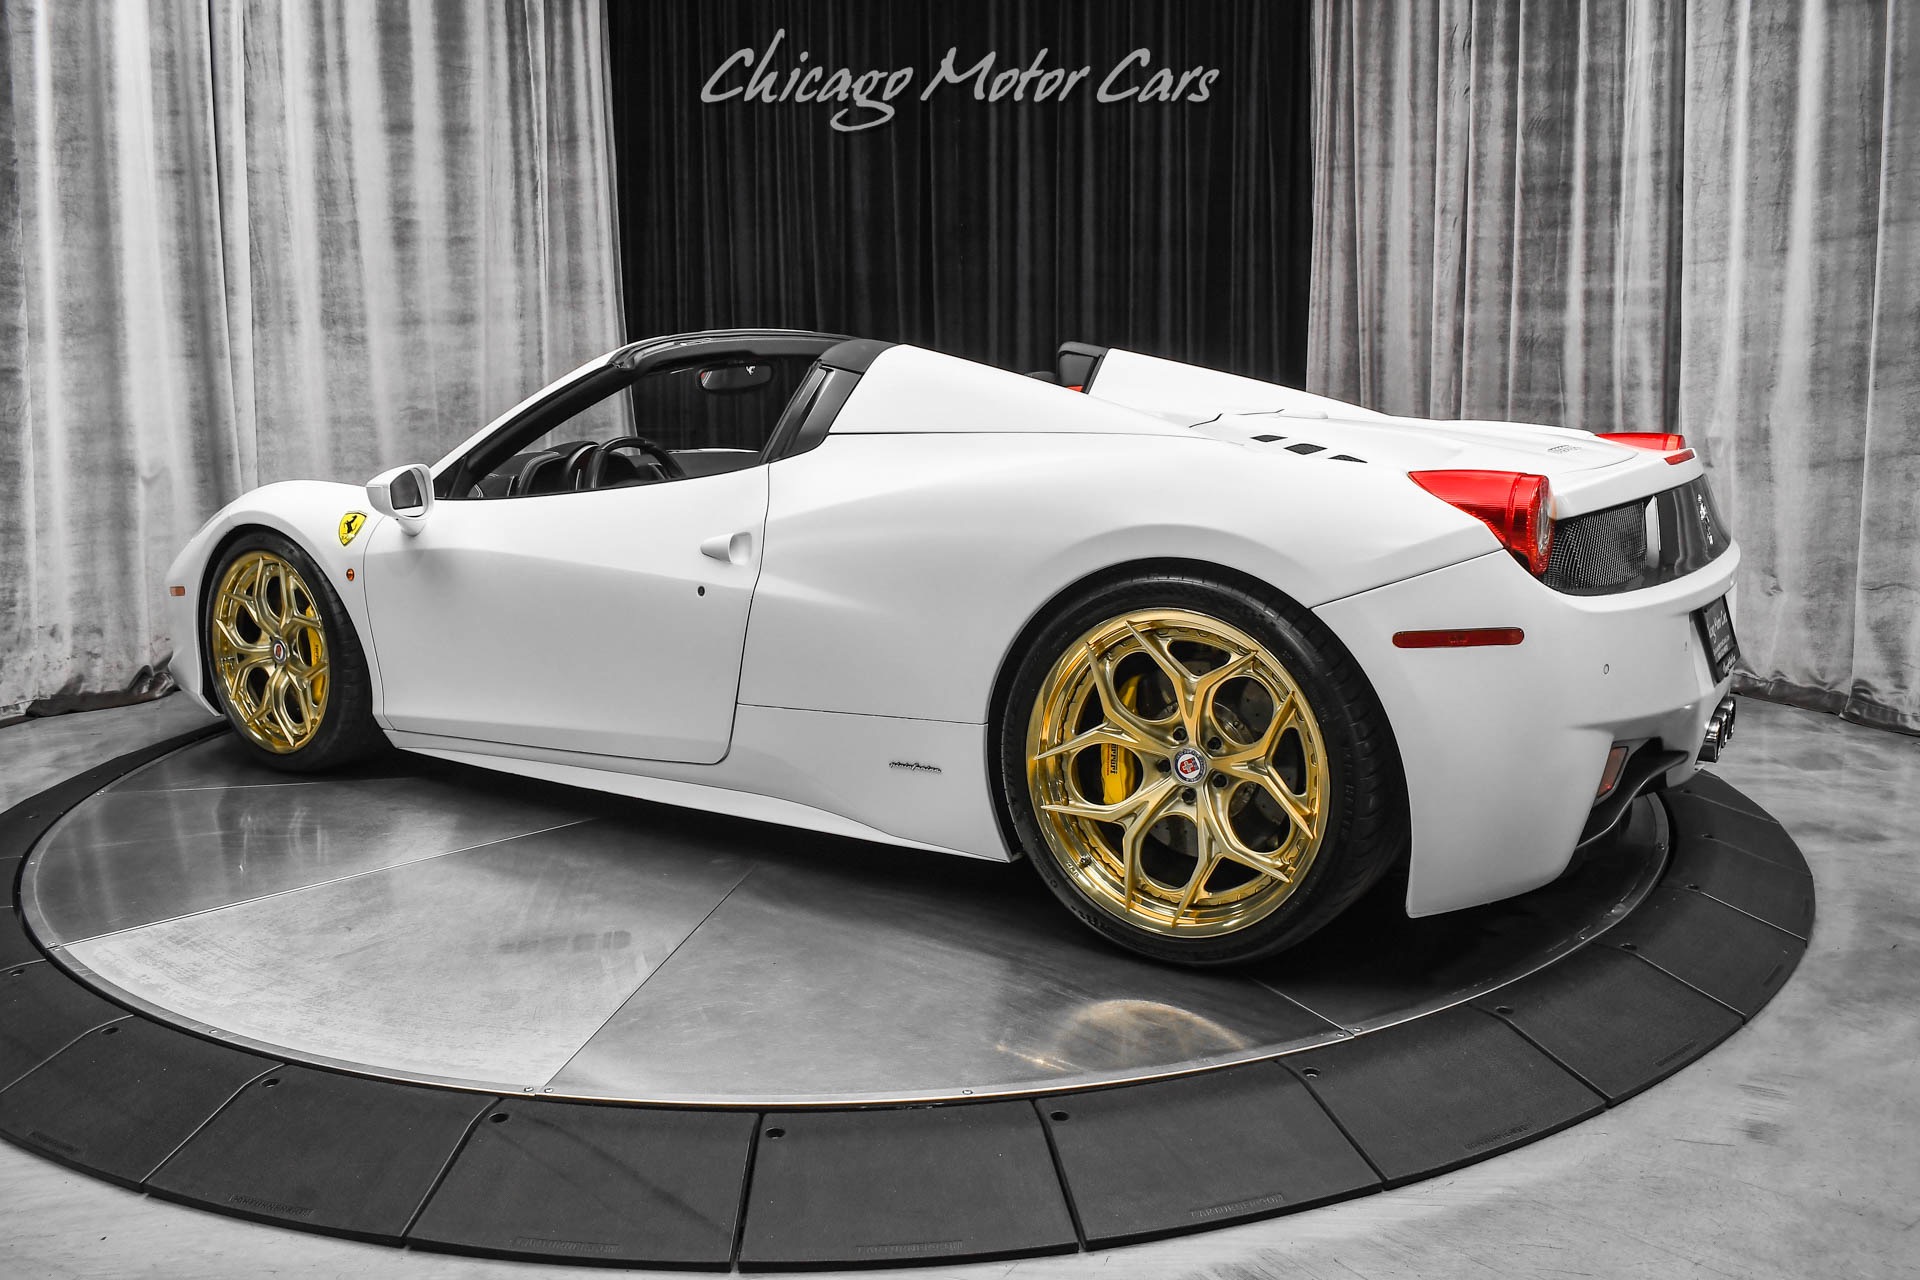 Used-2013-Ferrari-458-Spider-RARE-Racing-Seats-TONS-of-Carbon-Fiber-HRE-Wheels-FULL-PPF-LOADED